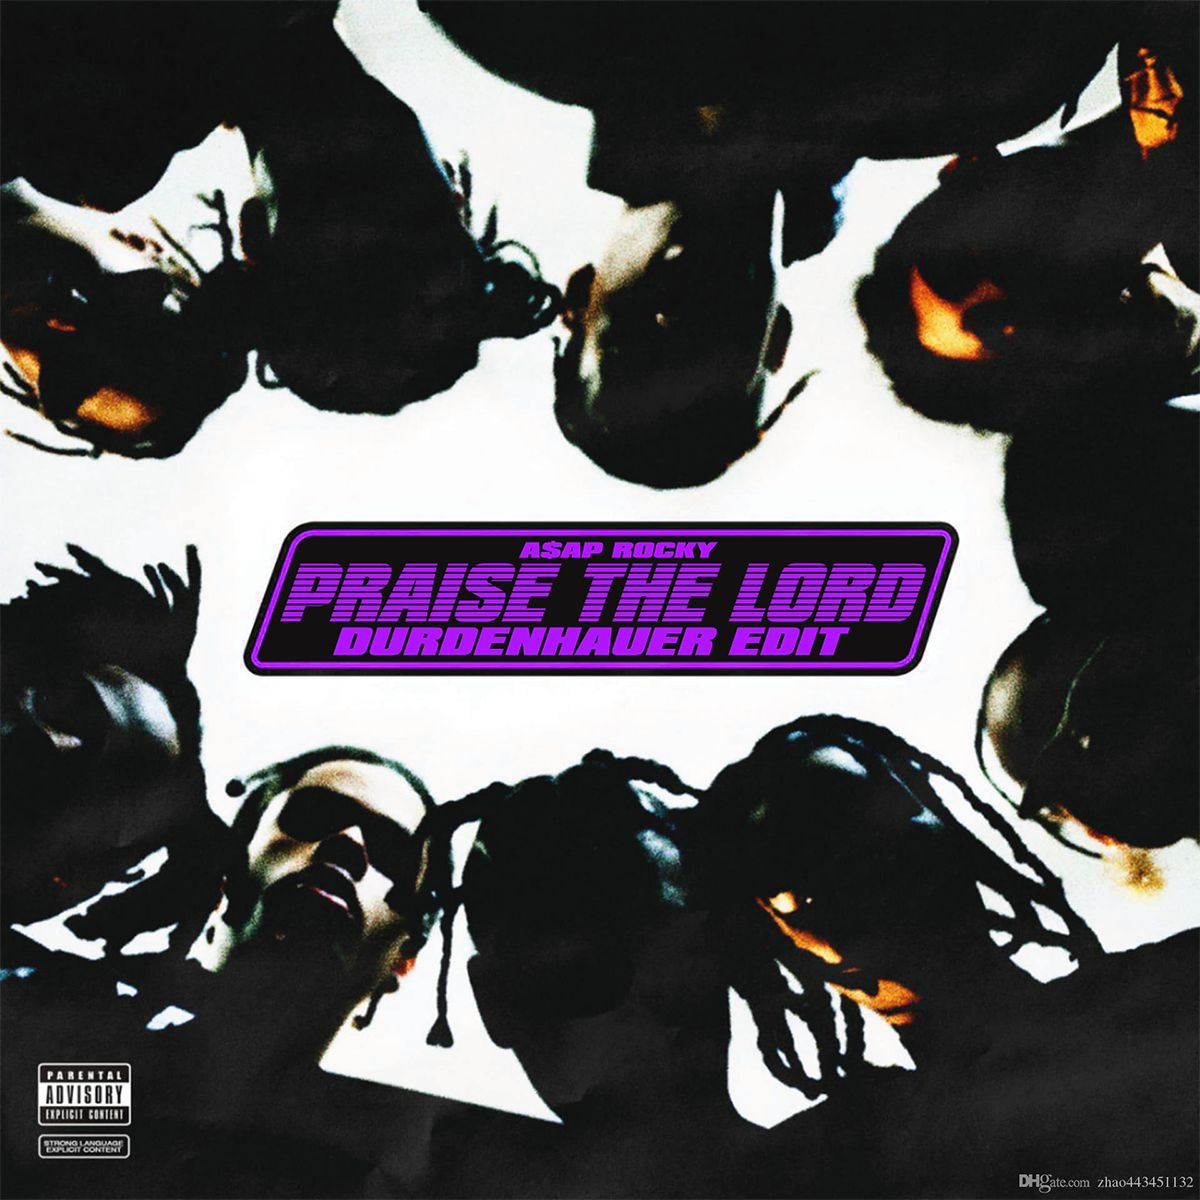 Aflaai A$AP ROCKY - Praise the Lord (DURDENHAUER Edit) [FREE DOWNLOAD]